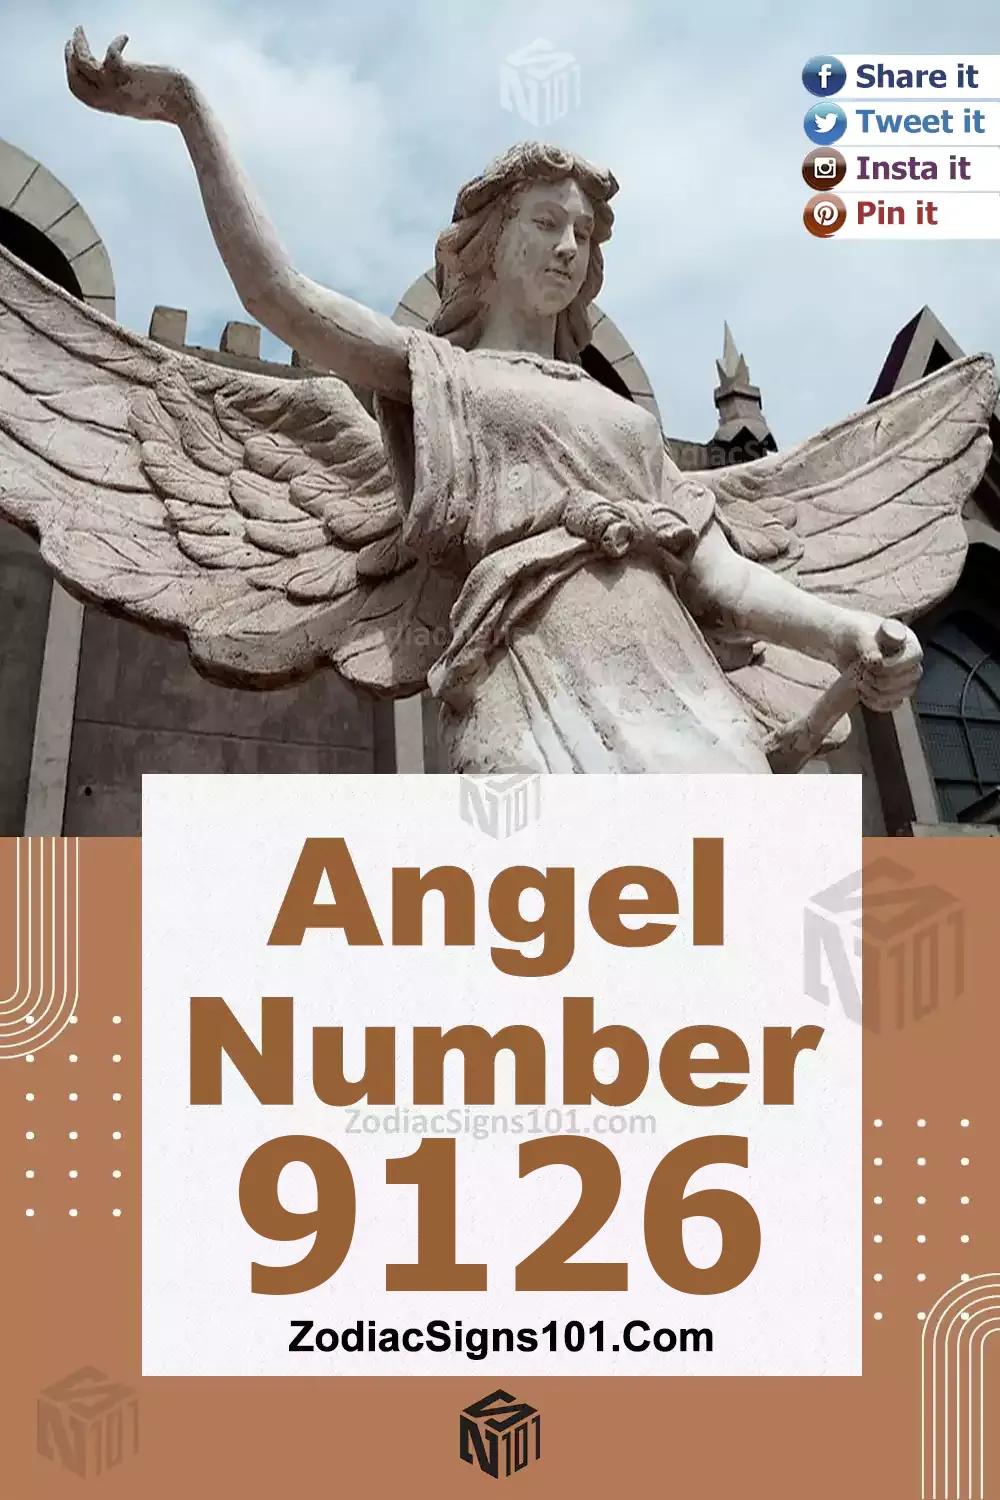 9126 Angel Number Meaning